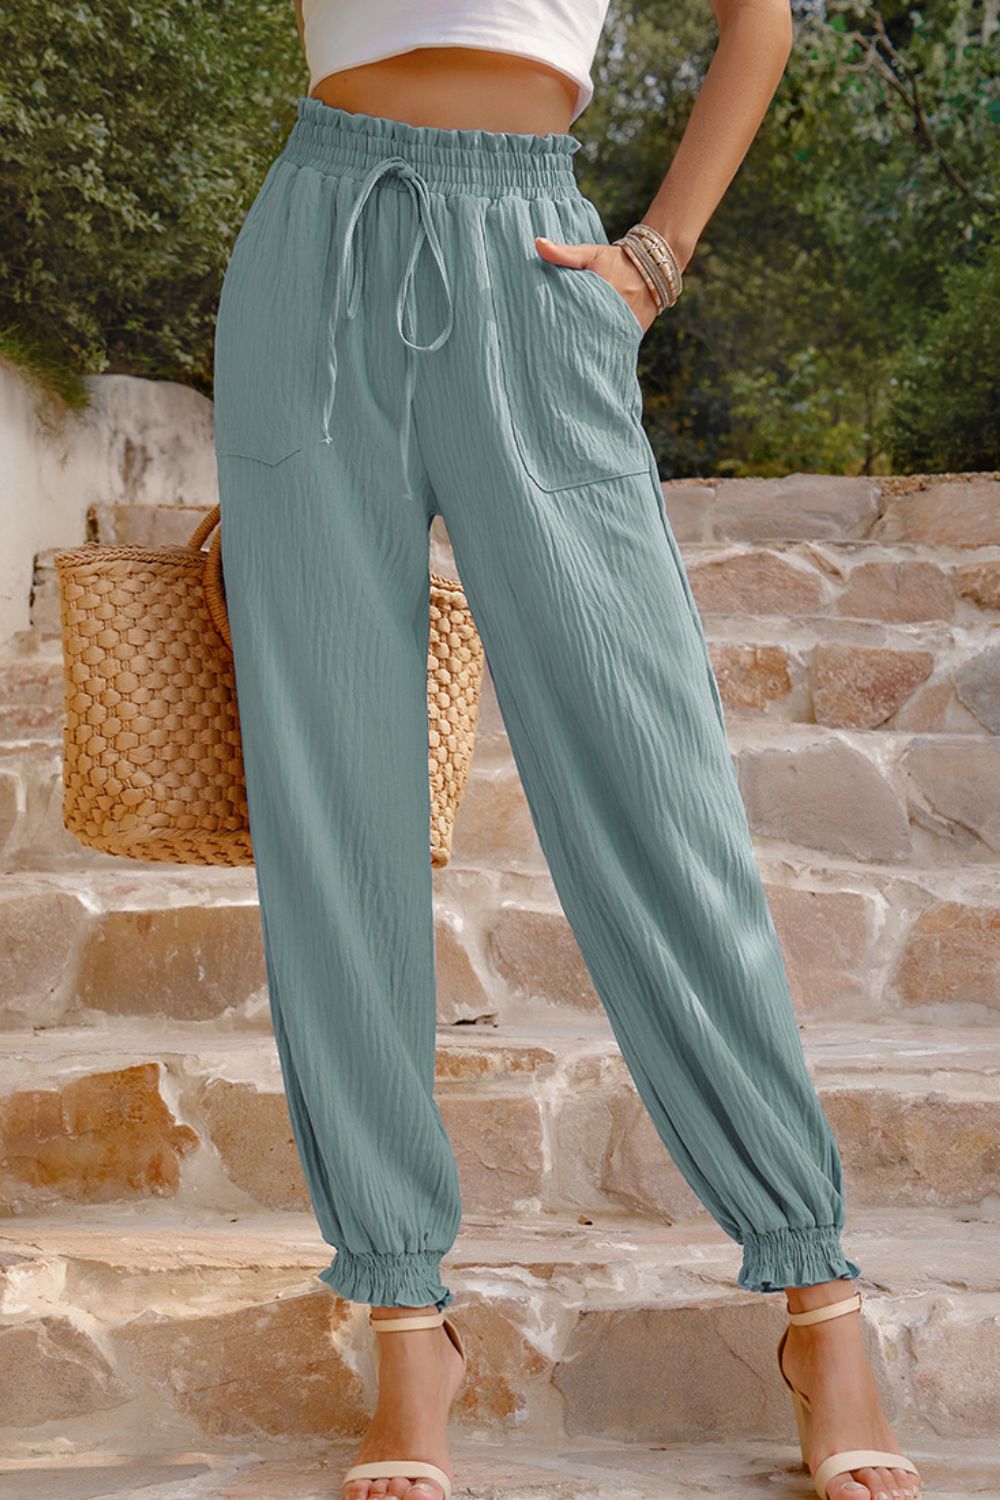 Textured Smocked Waist Pants with Pockets - Teal / S - Bottoms - Pants - 9 - 2024